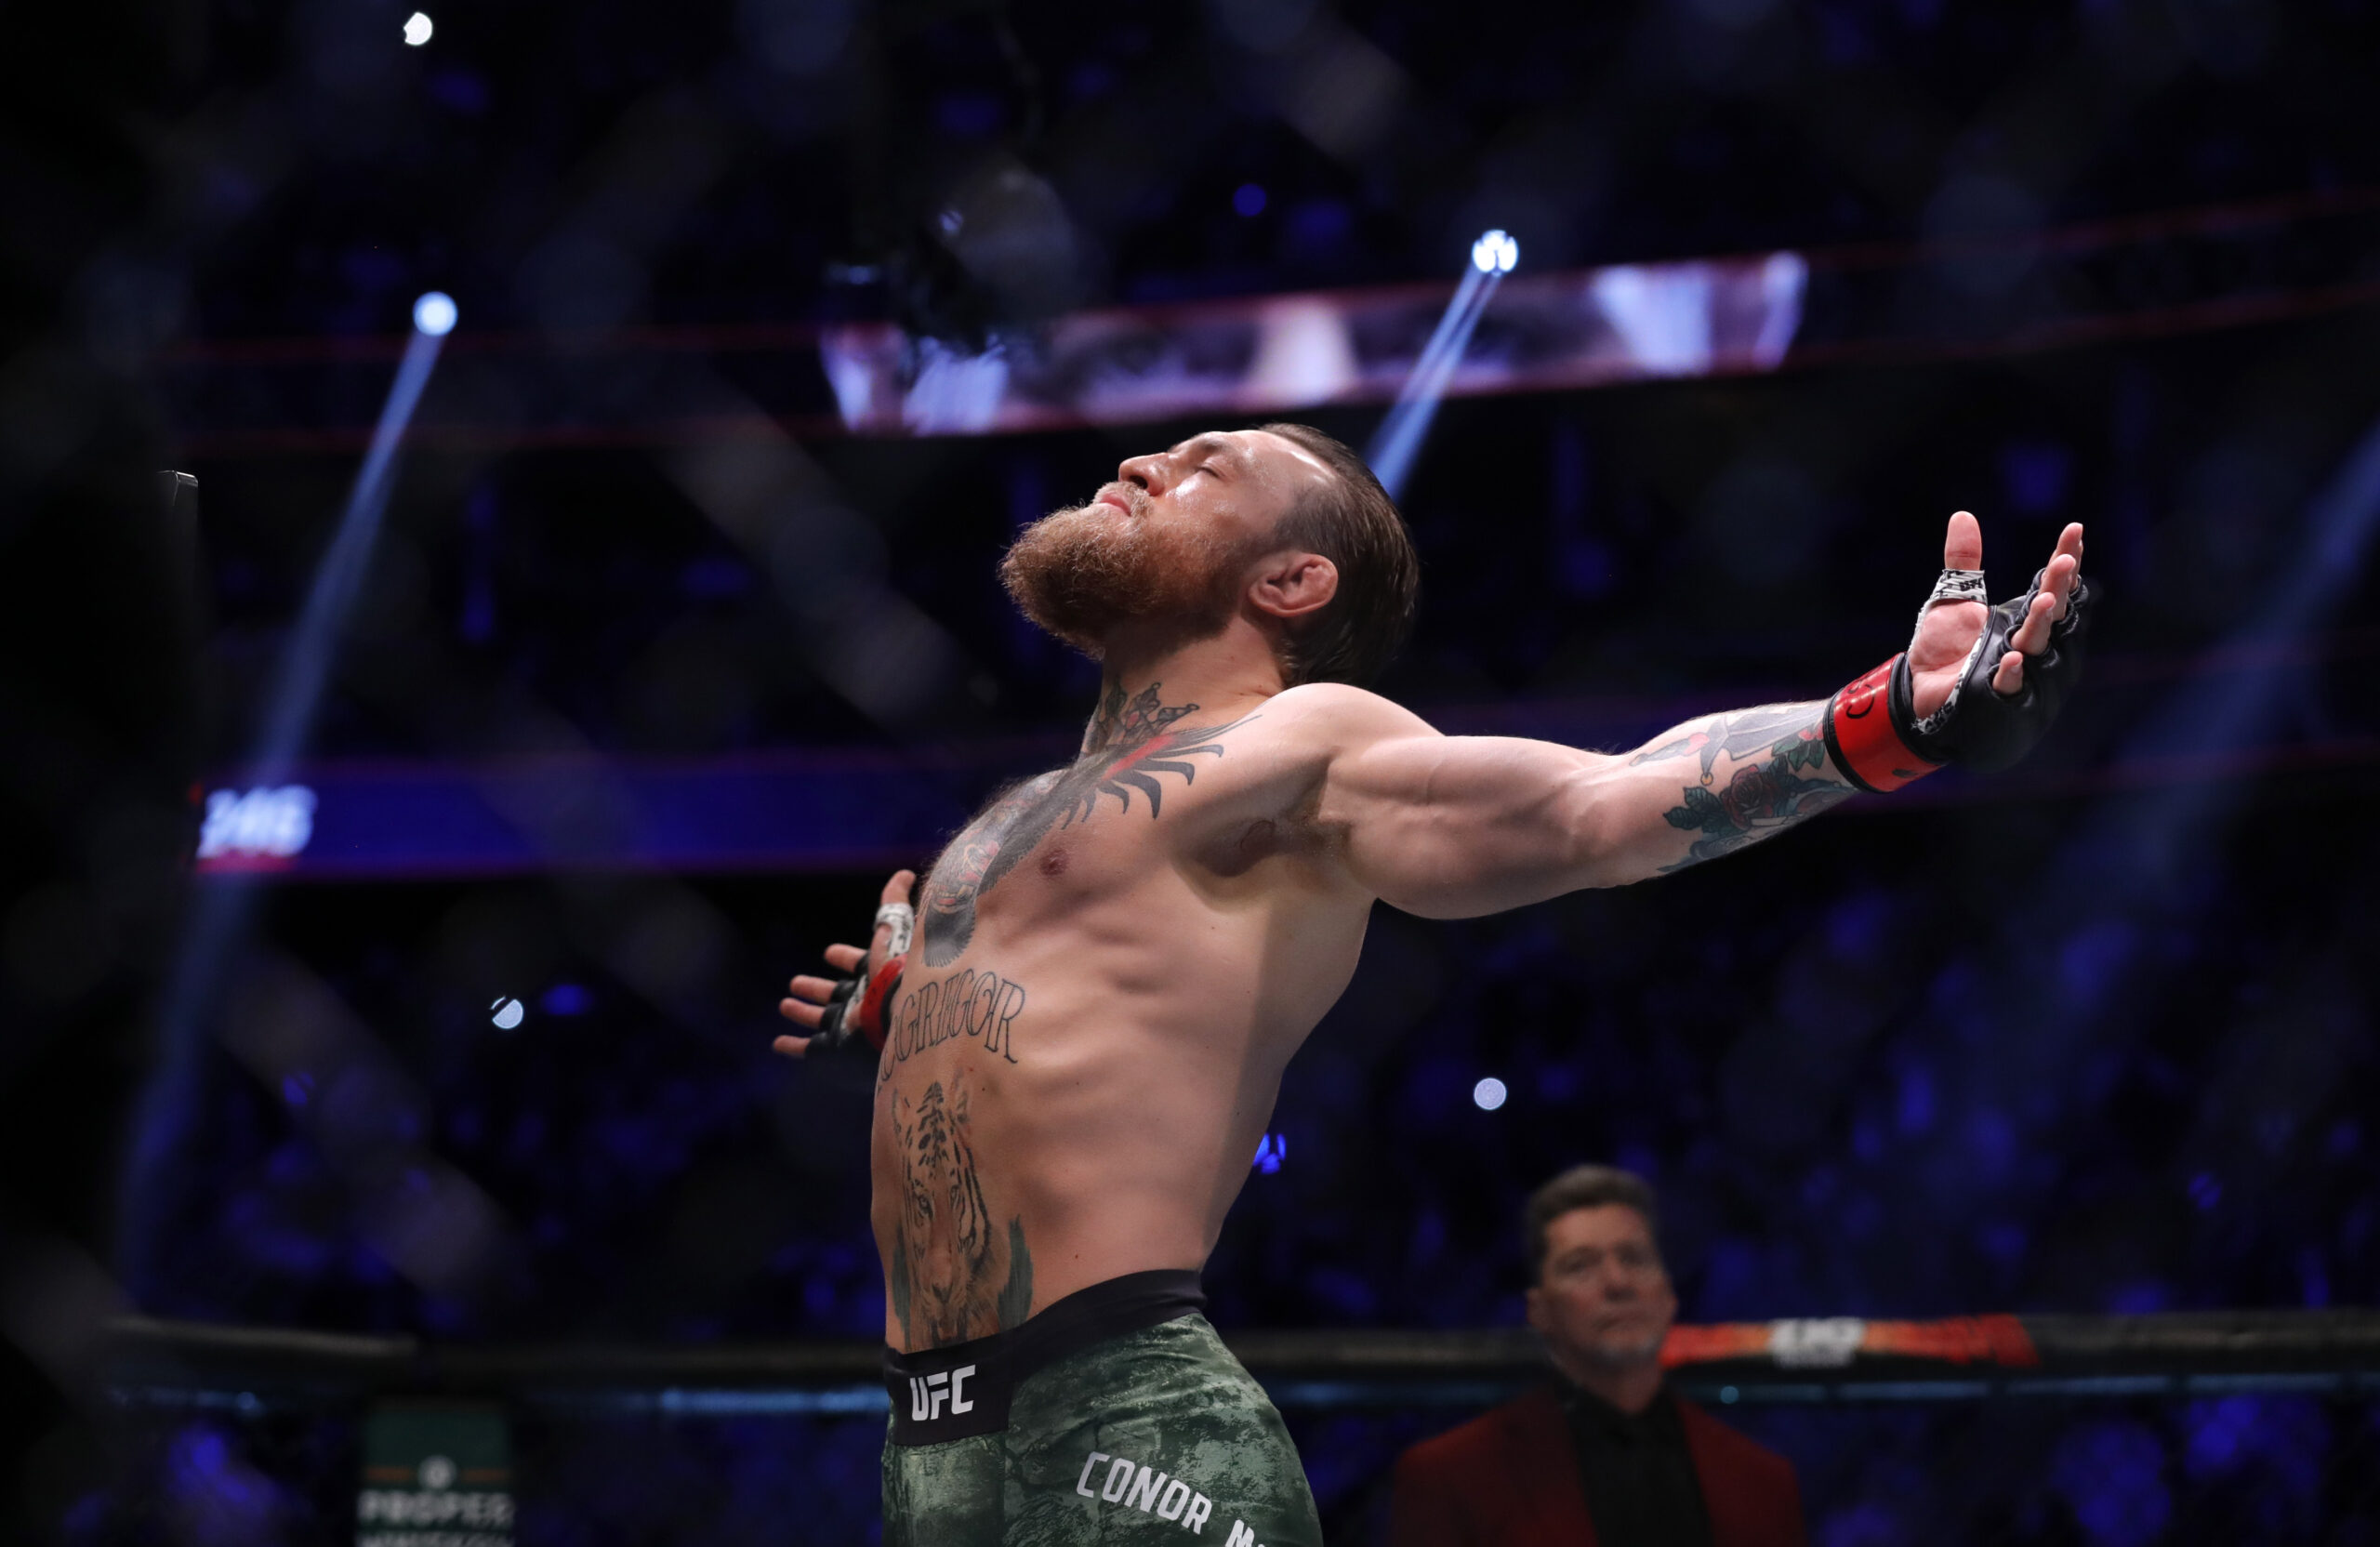 Ufc: Is Conor Mcgregor A Hall Of Famer Or Just A Good Fighter?